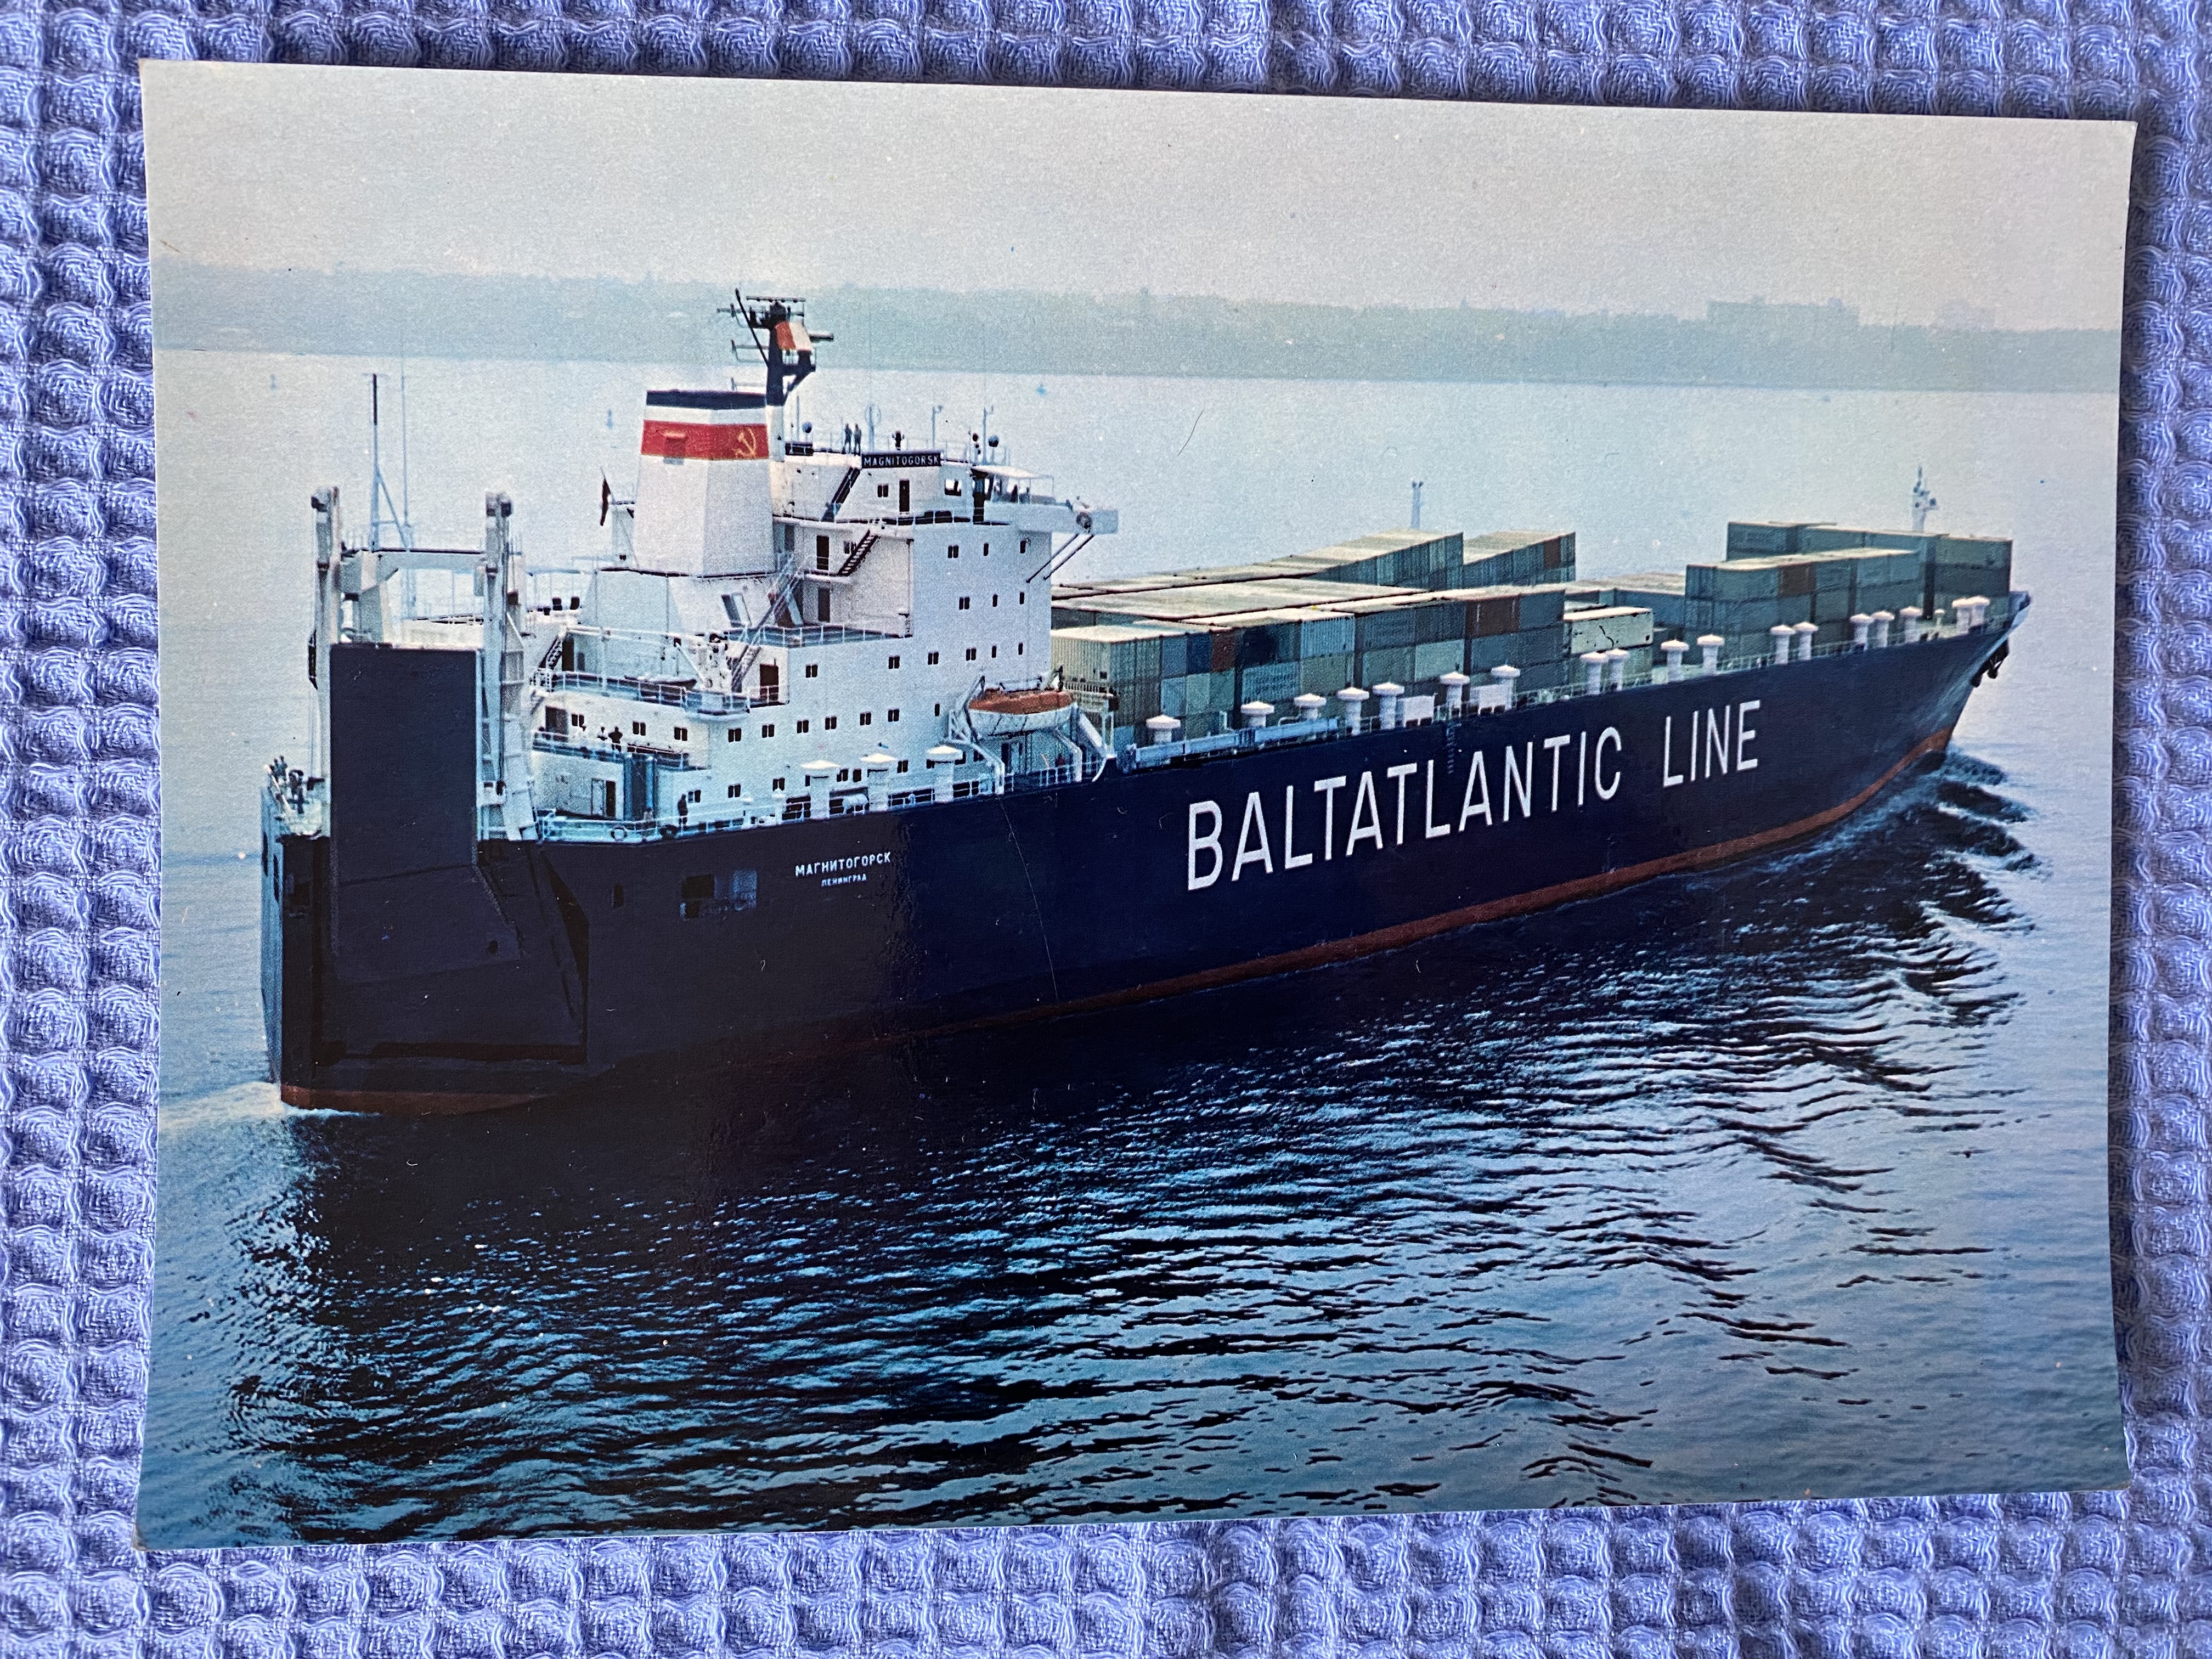 LARGE SIZE FULL COLOUR PHOTOGRAPH OF THE RO-RO DRY CARGO SHIP THE MAGNITOGORSK FROM THE BALTATLANTIC LINE